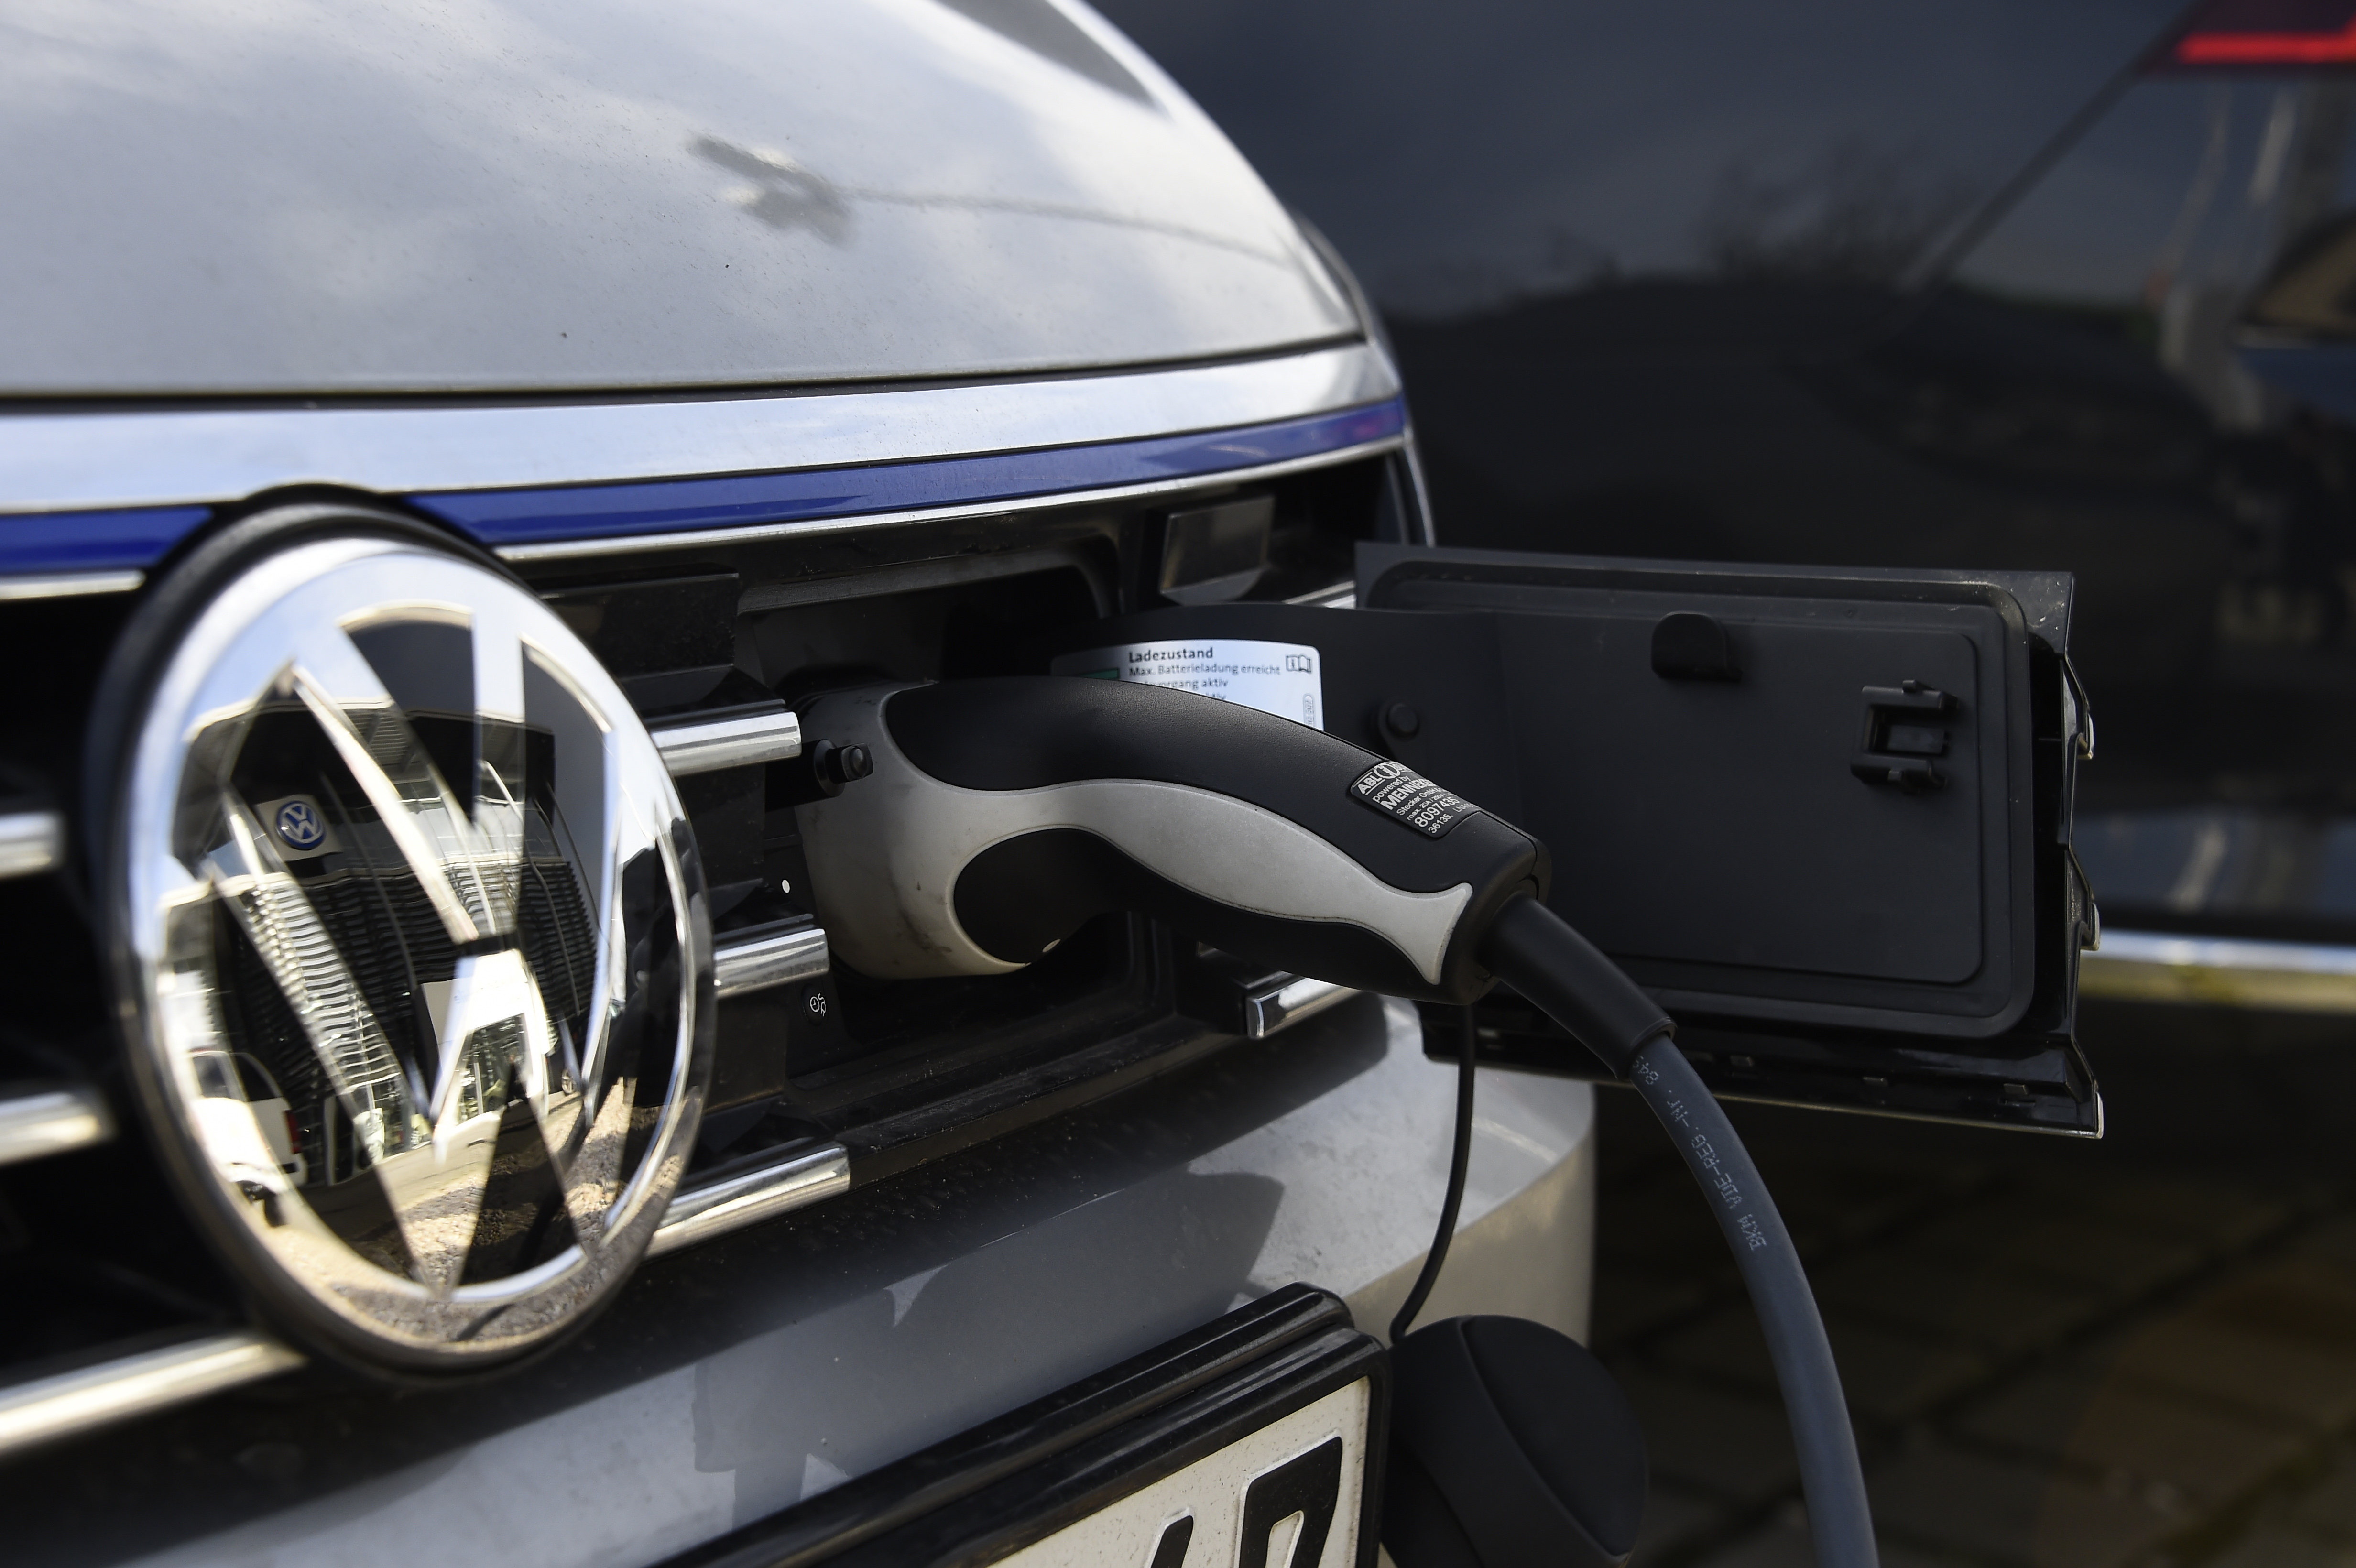 A VW electric car is plugged on a power station at a Service station in Berlin on February 2, 2016. / AFP PHOTO / TOBIAS SCHWARZ